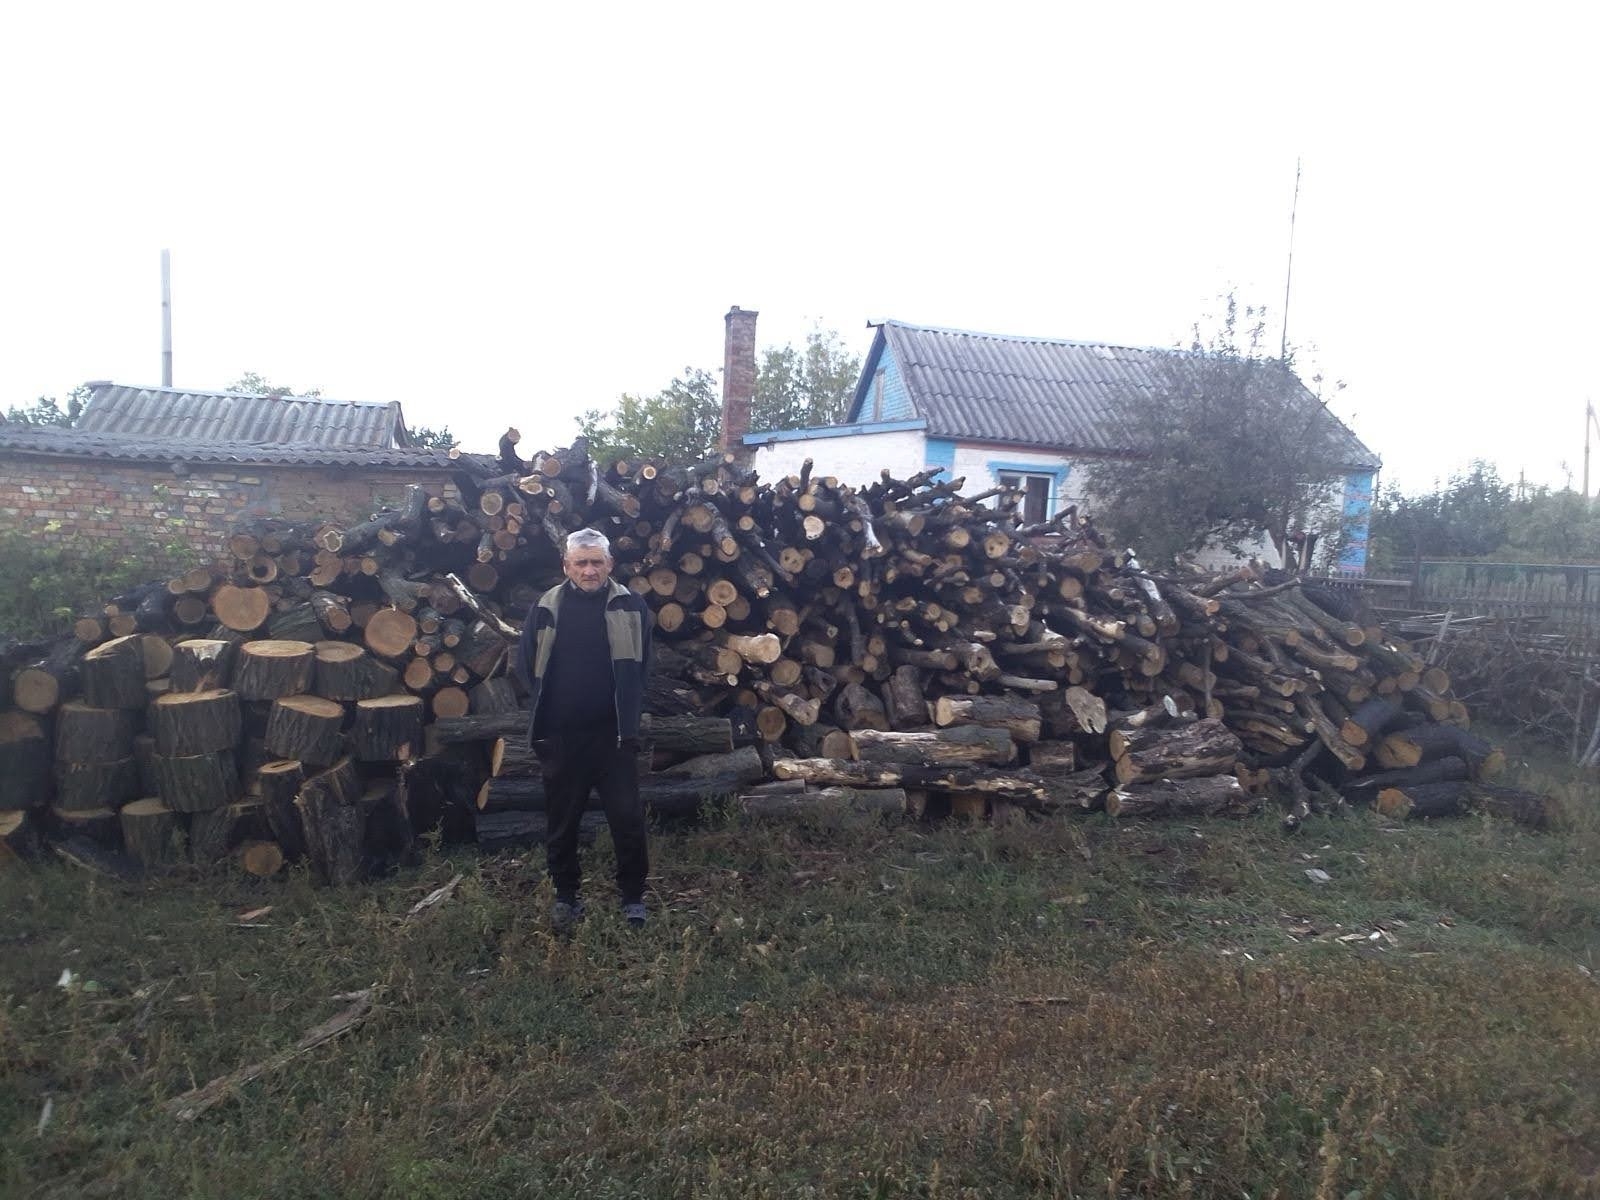 An elderly Jewish man in the Dnipro region of Ukraine stands before a delivery of firewood made by JDC as part of an effort to support Ukrainian Jews in advance of a punishing winter. (Courtesy of the JDC)